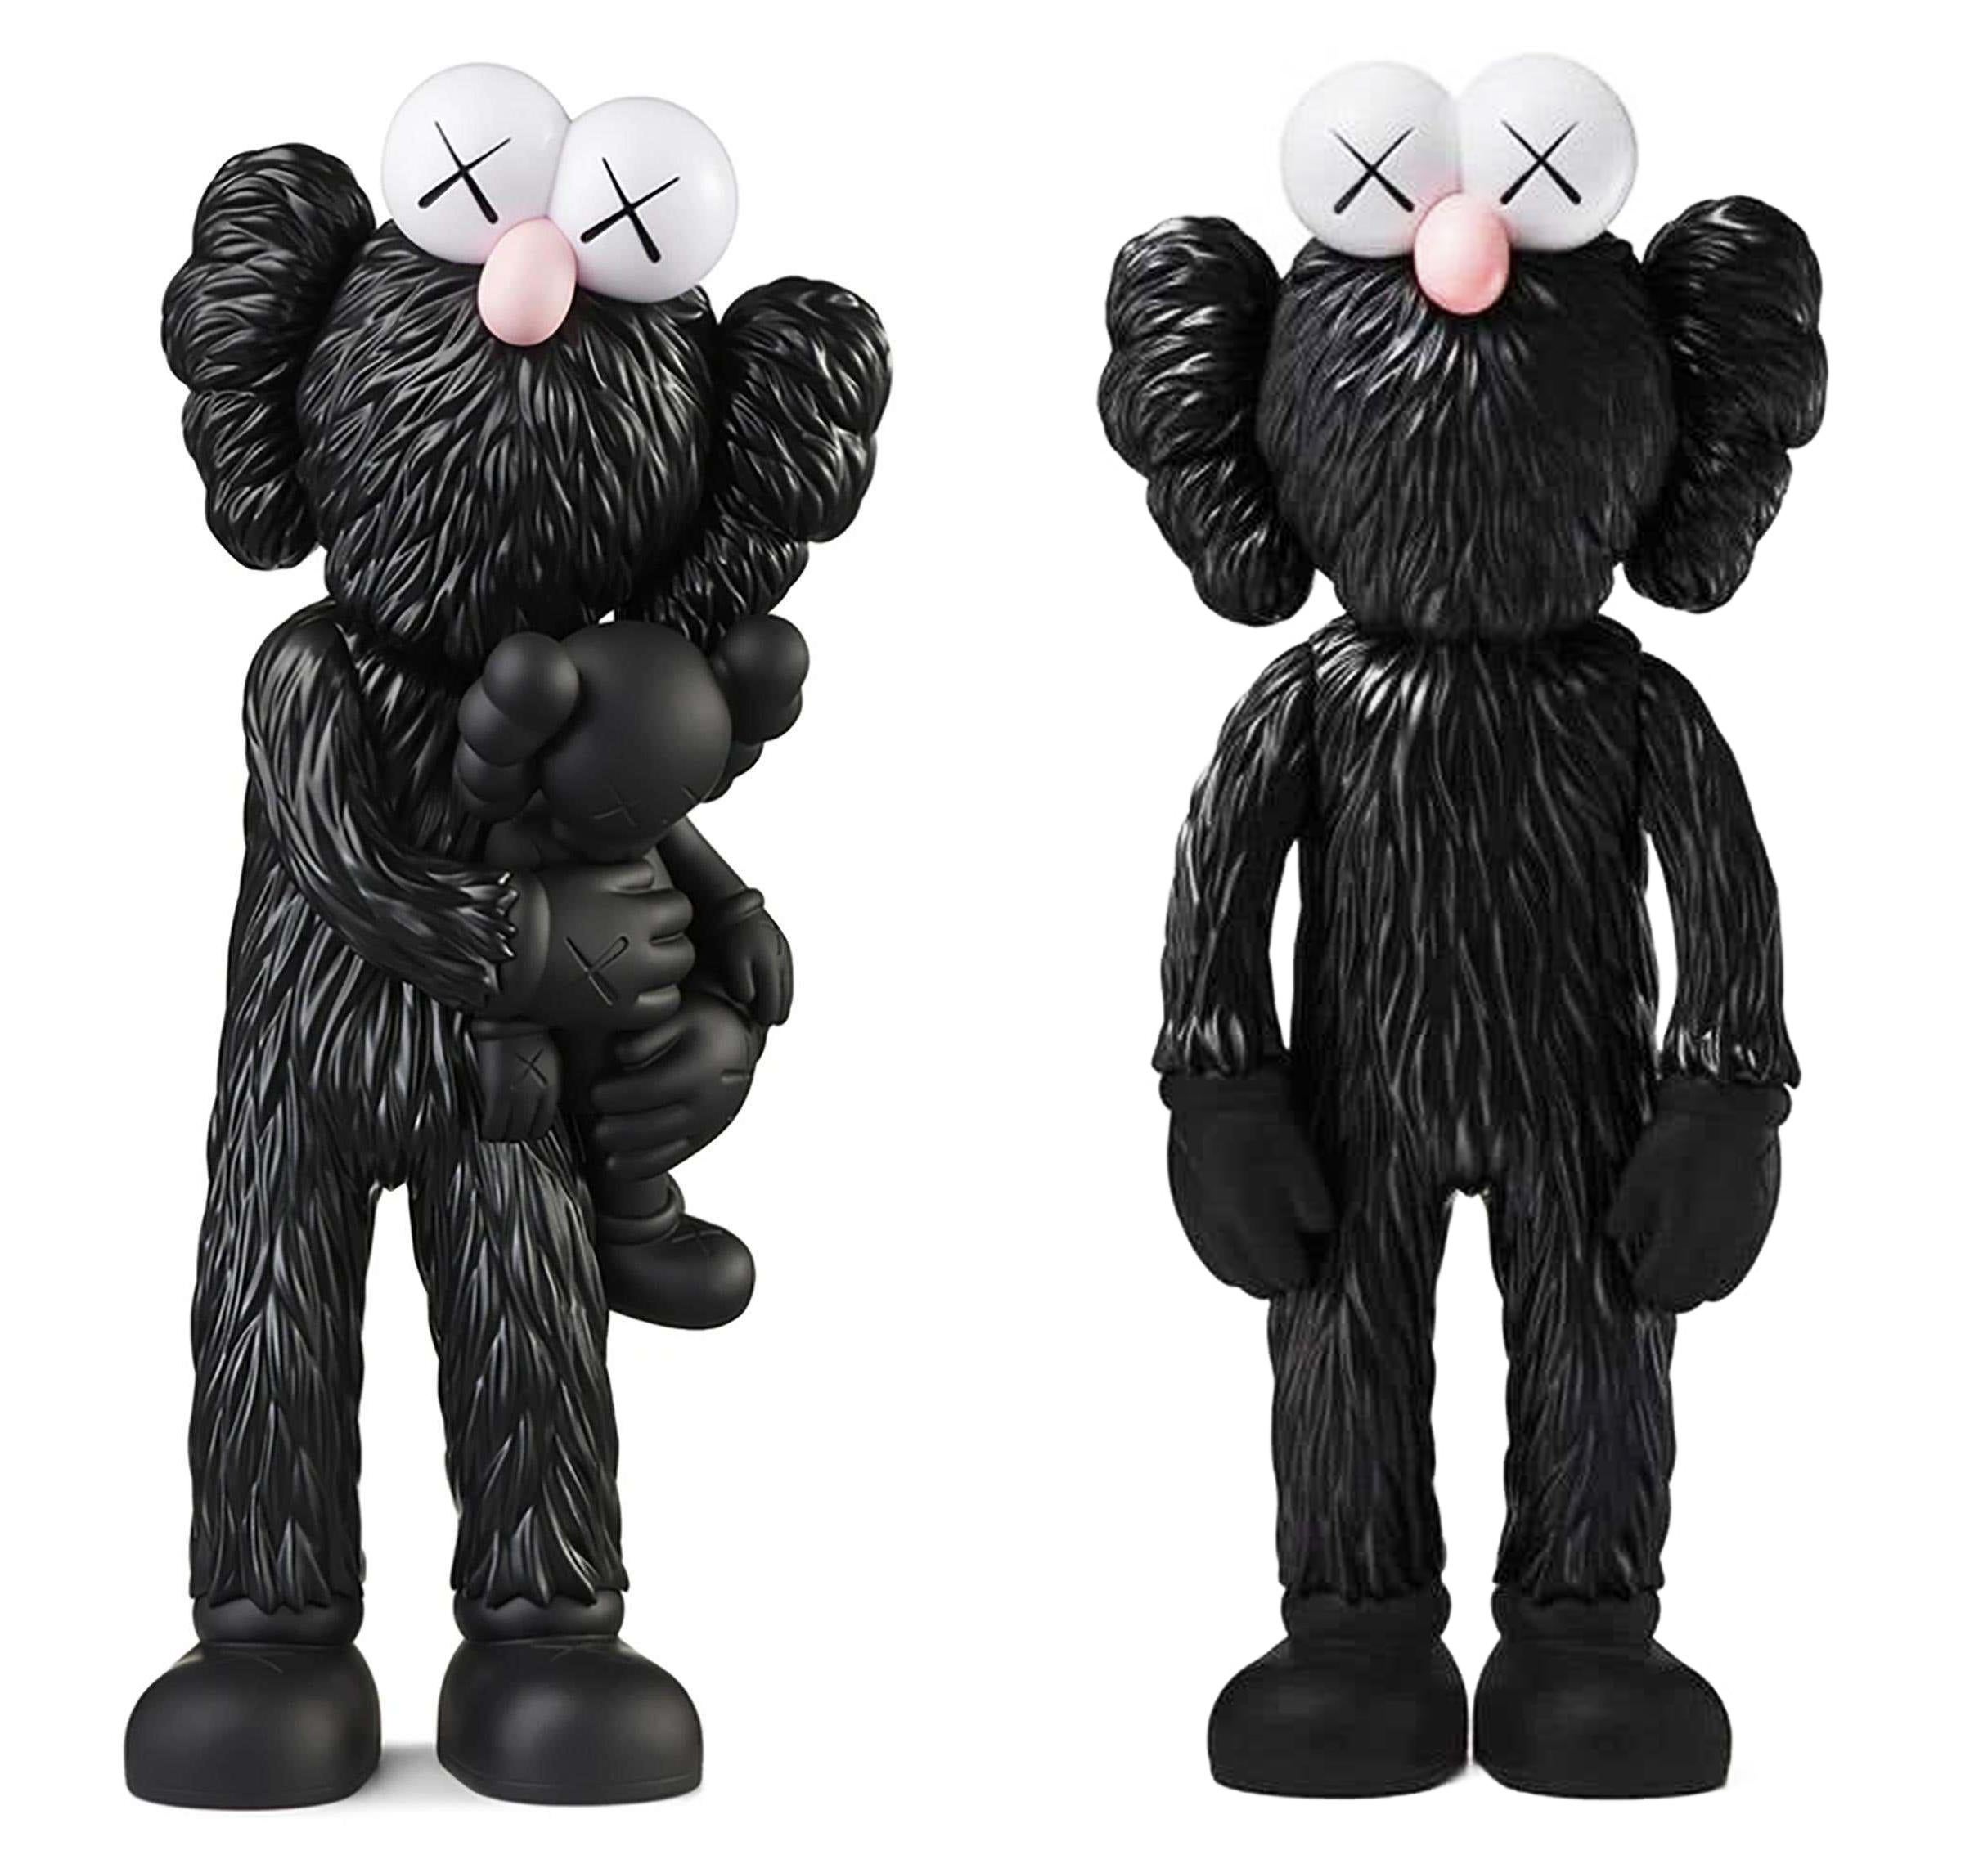 KAWS BFF Black & KAWS TAKE Black (set of 2 KAWS Companions): 
A well-received KAWS figure set featuring KAWS' smaller scale BFF sculpture originally on display in Los Angeles's Playa Vista neighborhood: and a variation of KAWS' large scale TAKE